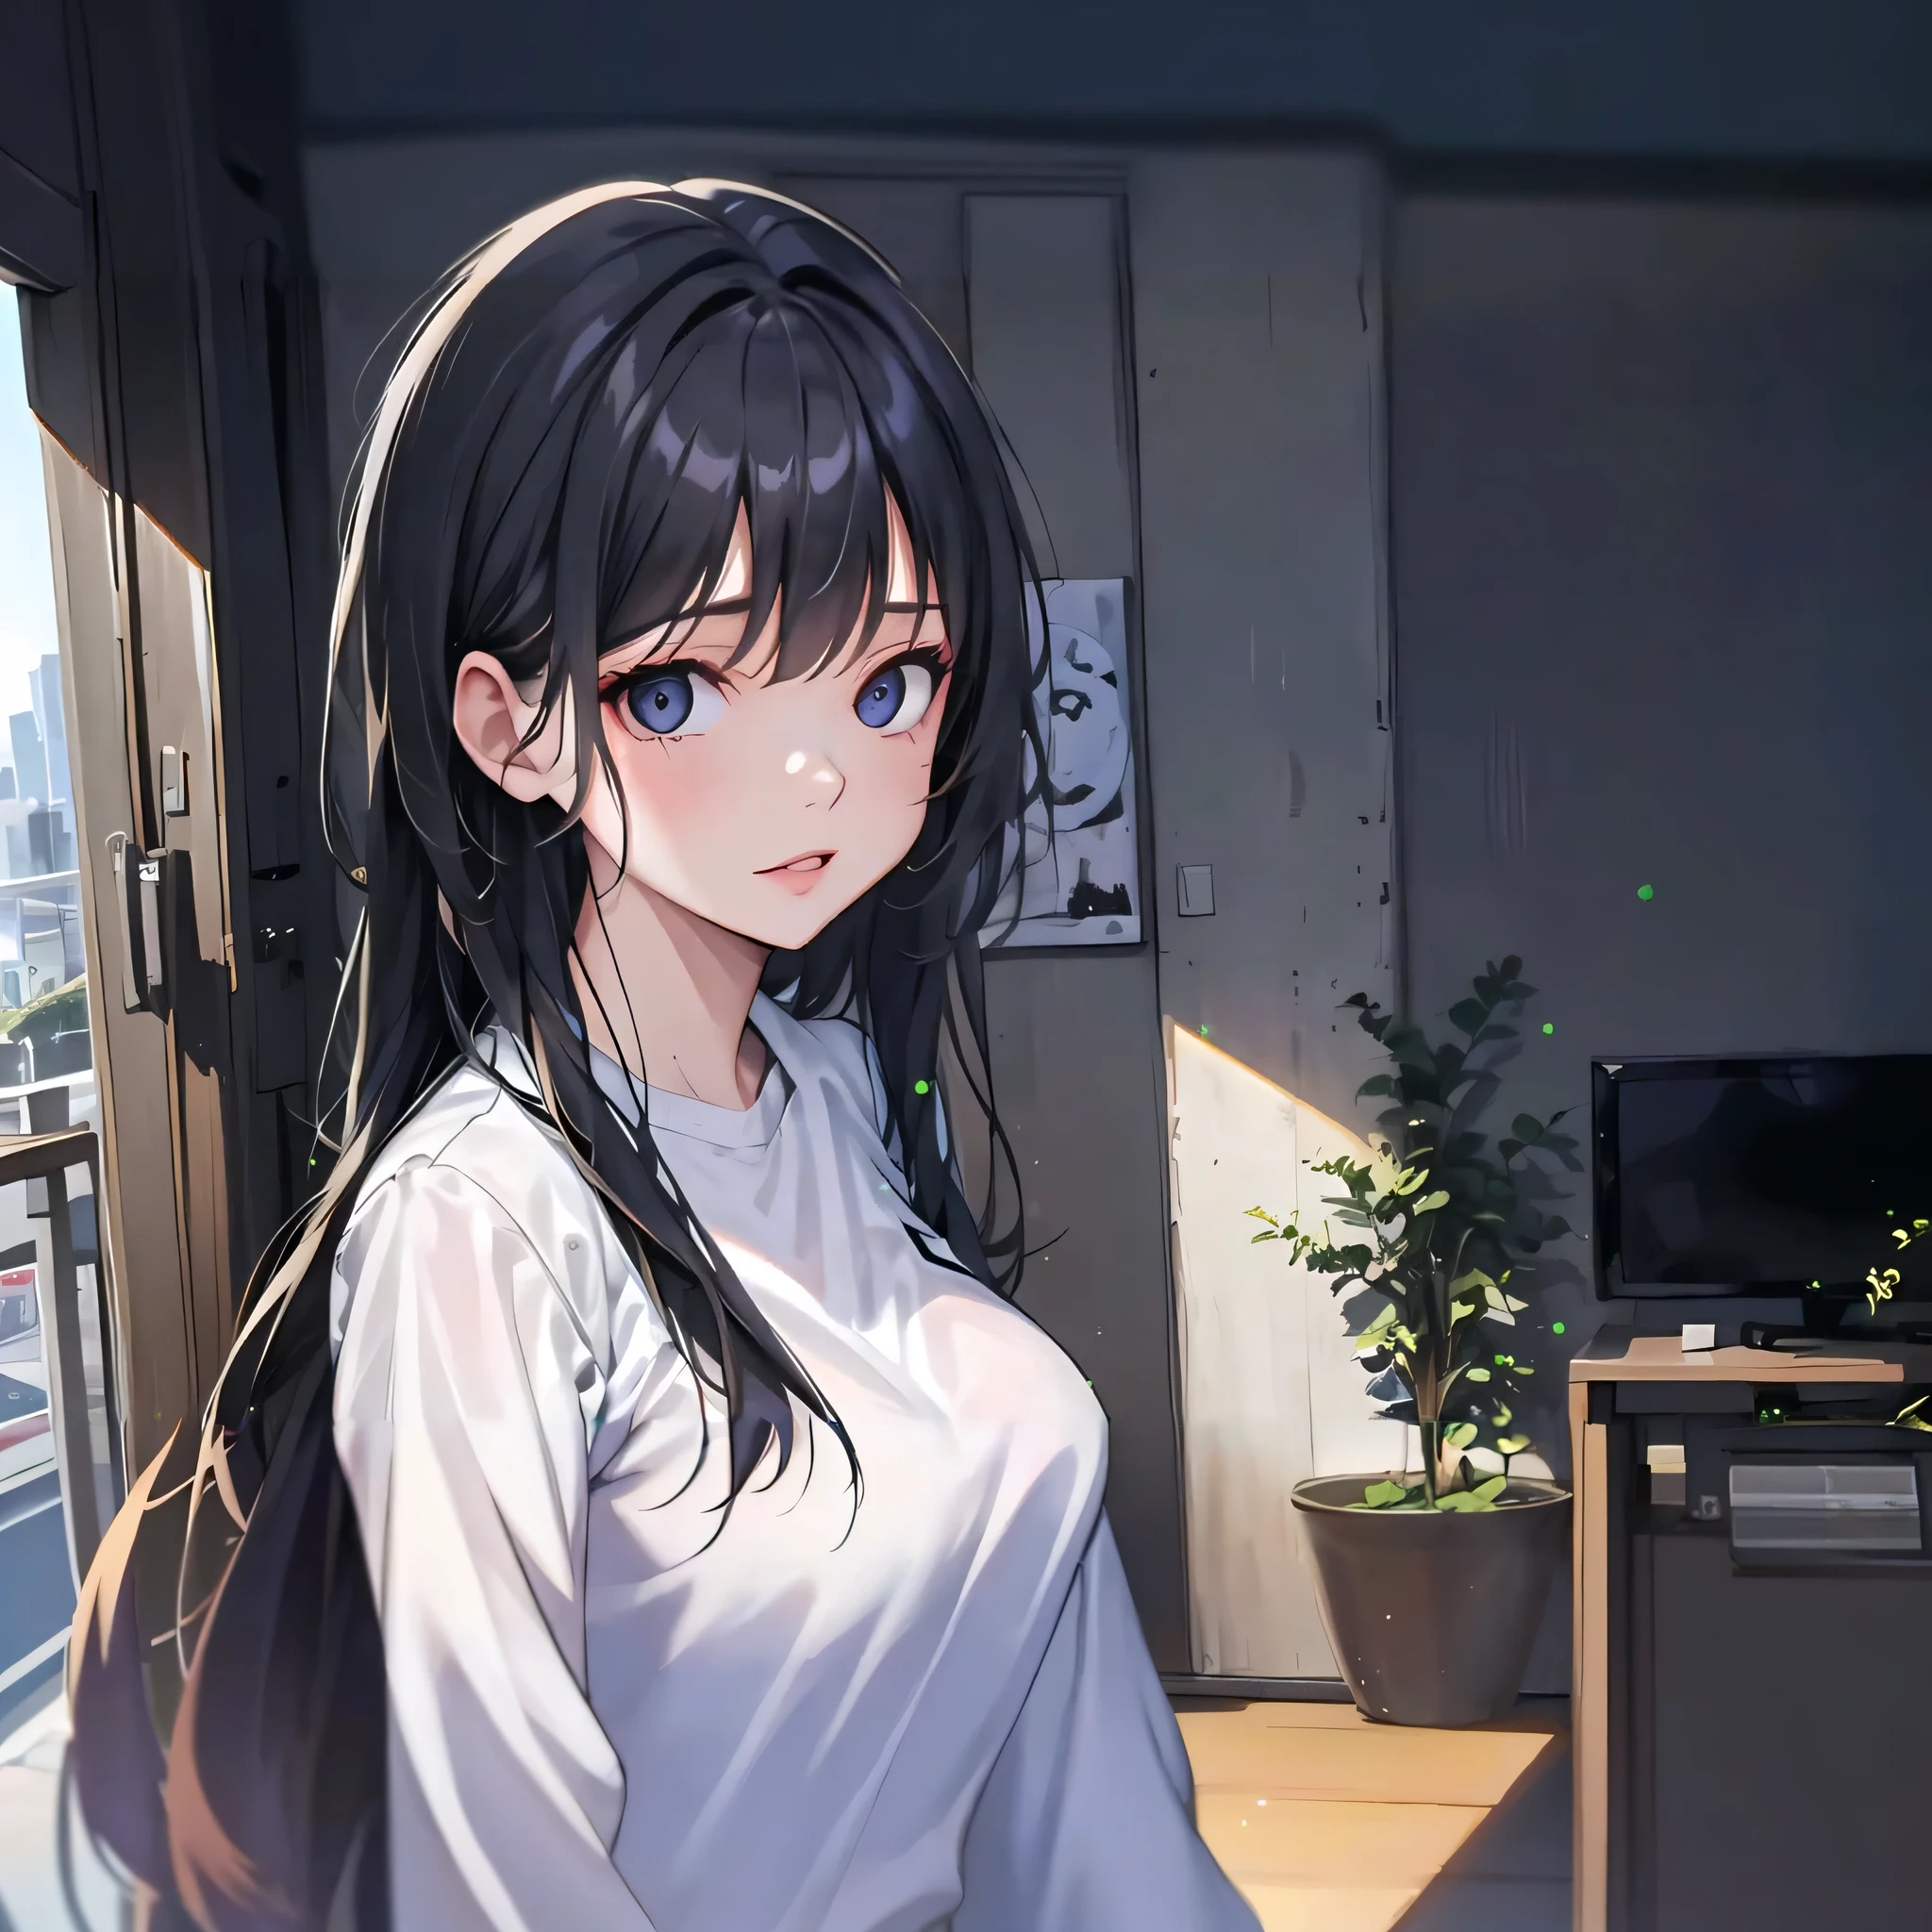 Anime girl with long black hair and blue eyes standing in the room, style of anime4 K, Smooth anime CG art, Anime style. 8K, realistic anime artstyle, attractive anime girls, seductive anime girls, 4k manga wallpapers, Realistic anime 3 D style, 4K anime wallpaper, Beautiful anime girl, Realistic anime art style, Realistic young anime girl